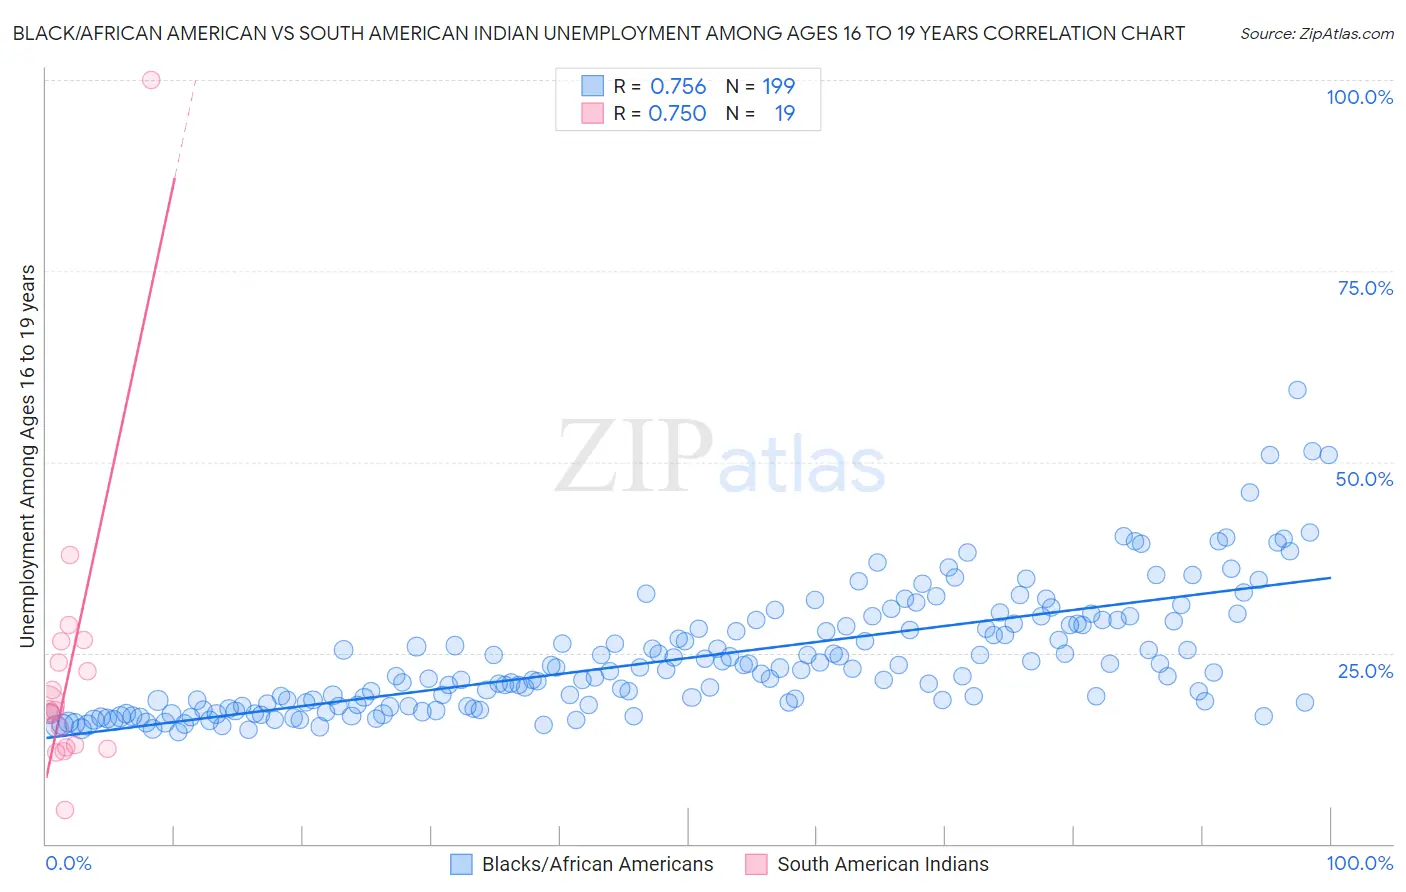 Black/African American vs South American Indian Unemployment Among Ages 16 to 19 years